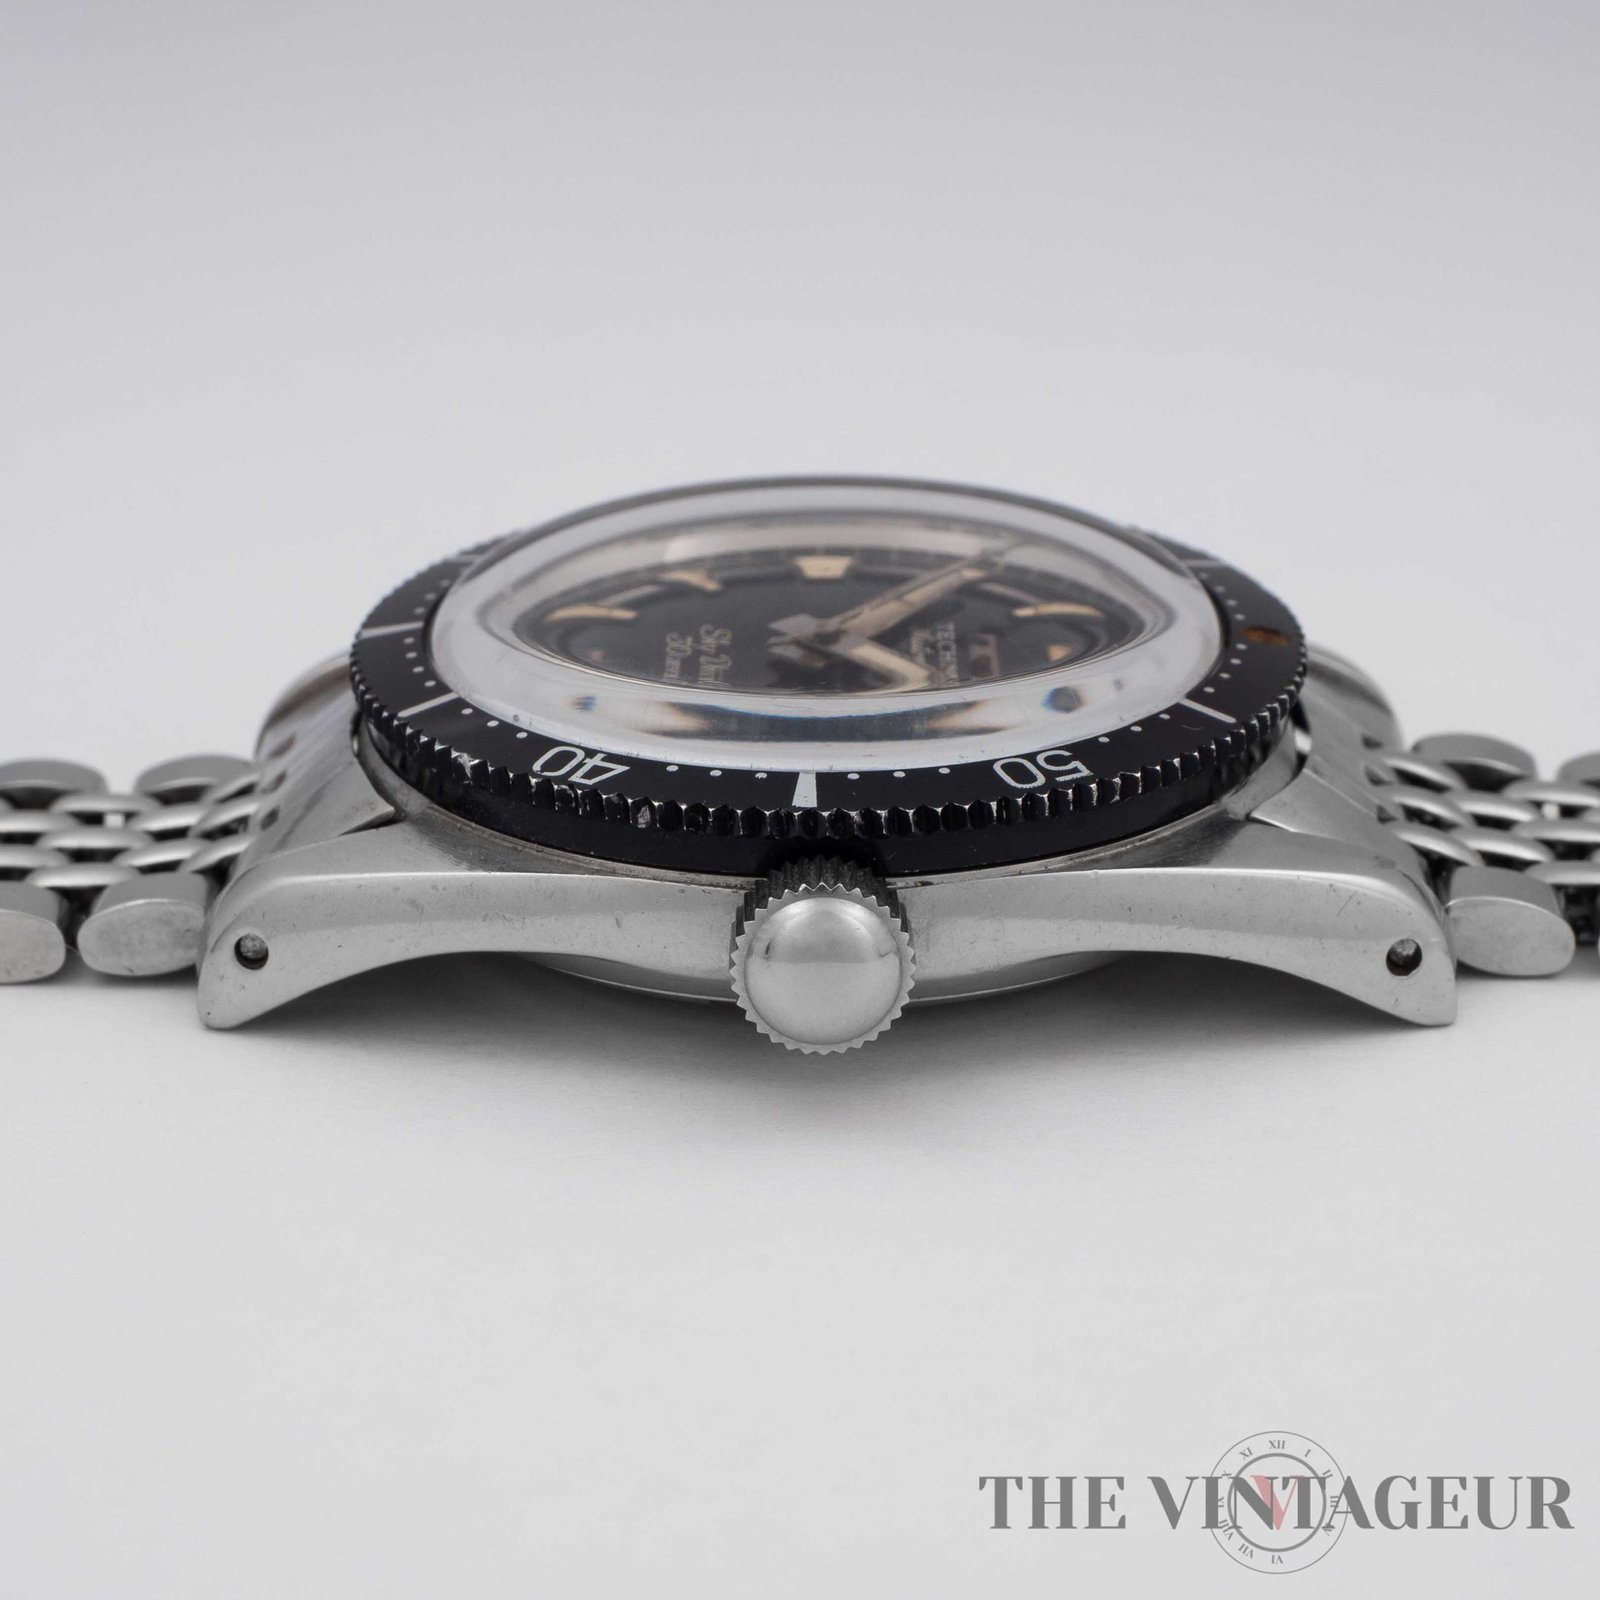 Technos – Sky Diver - The Vintageur - Your bespoke watches collection - Collectible watches and more